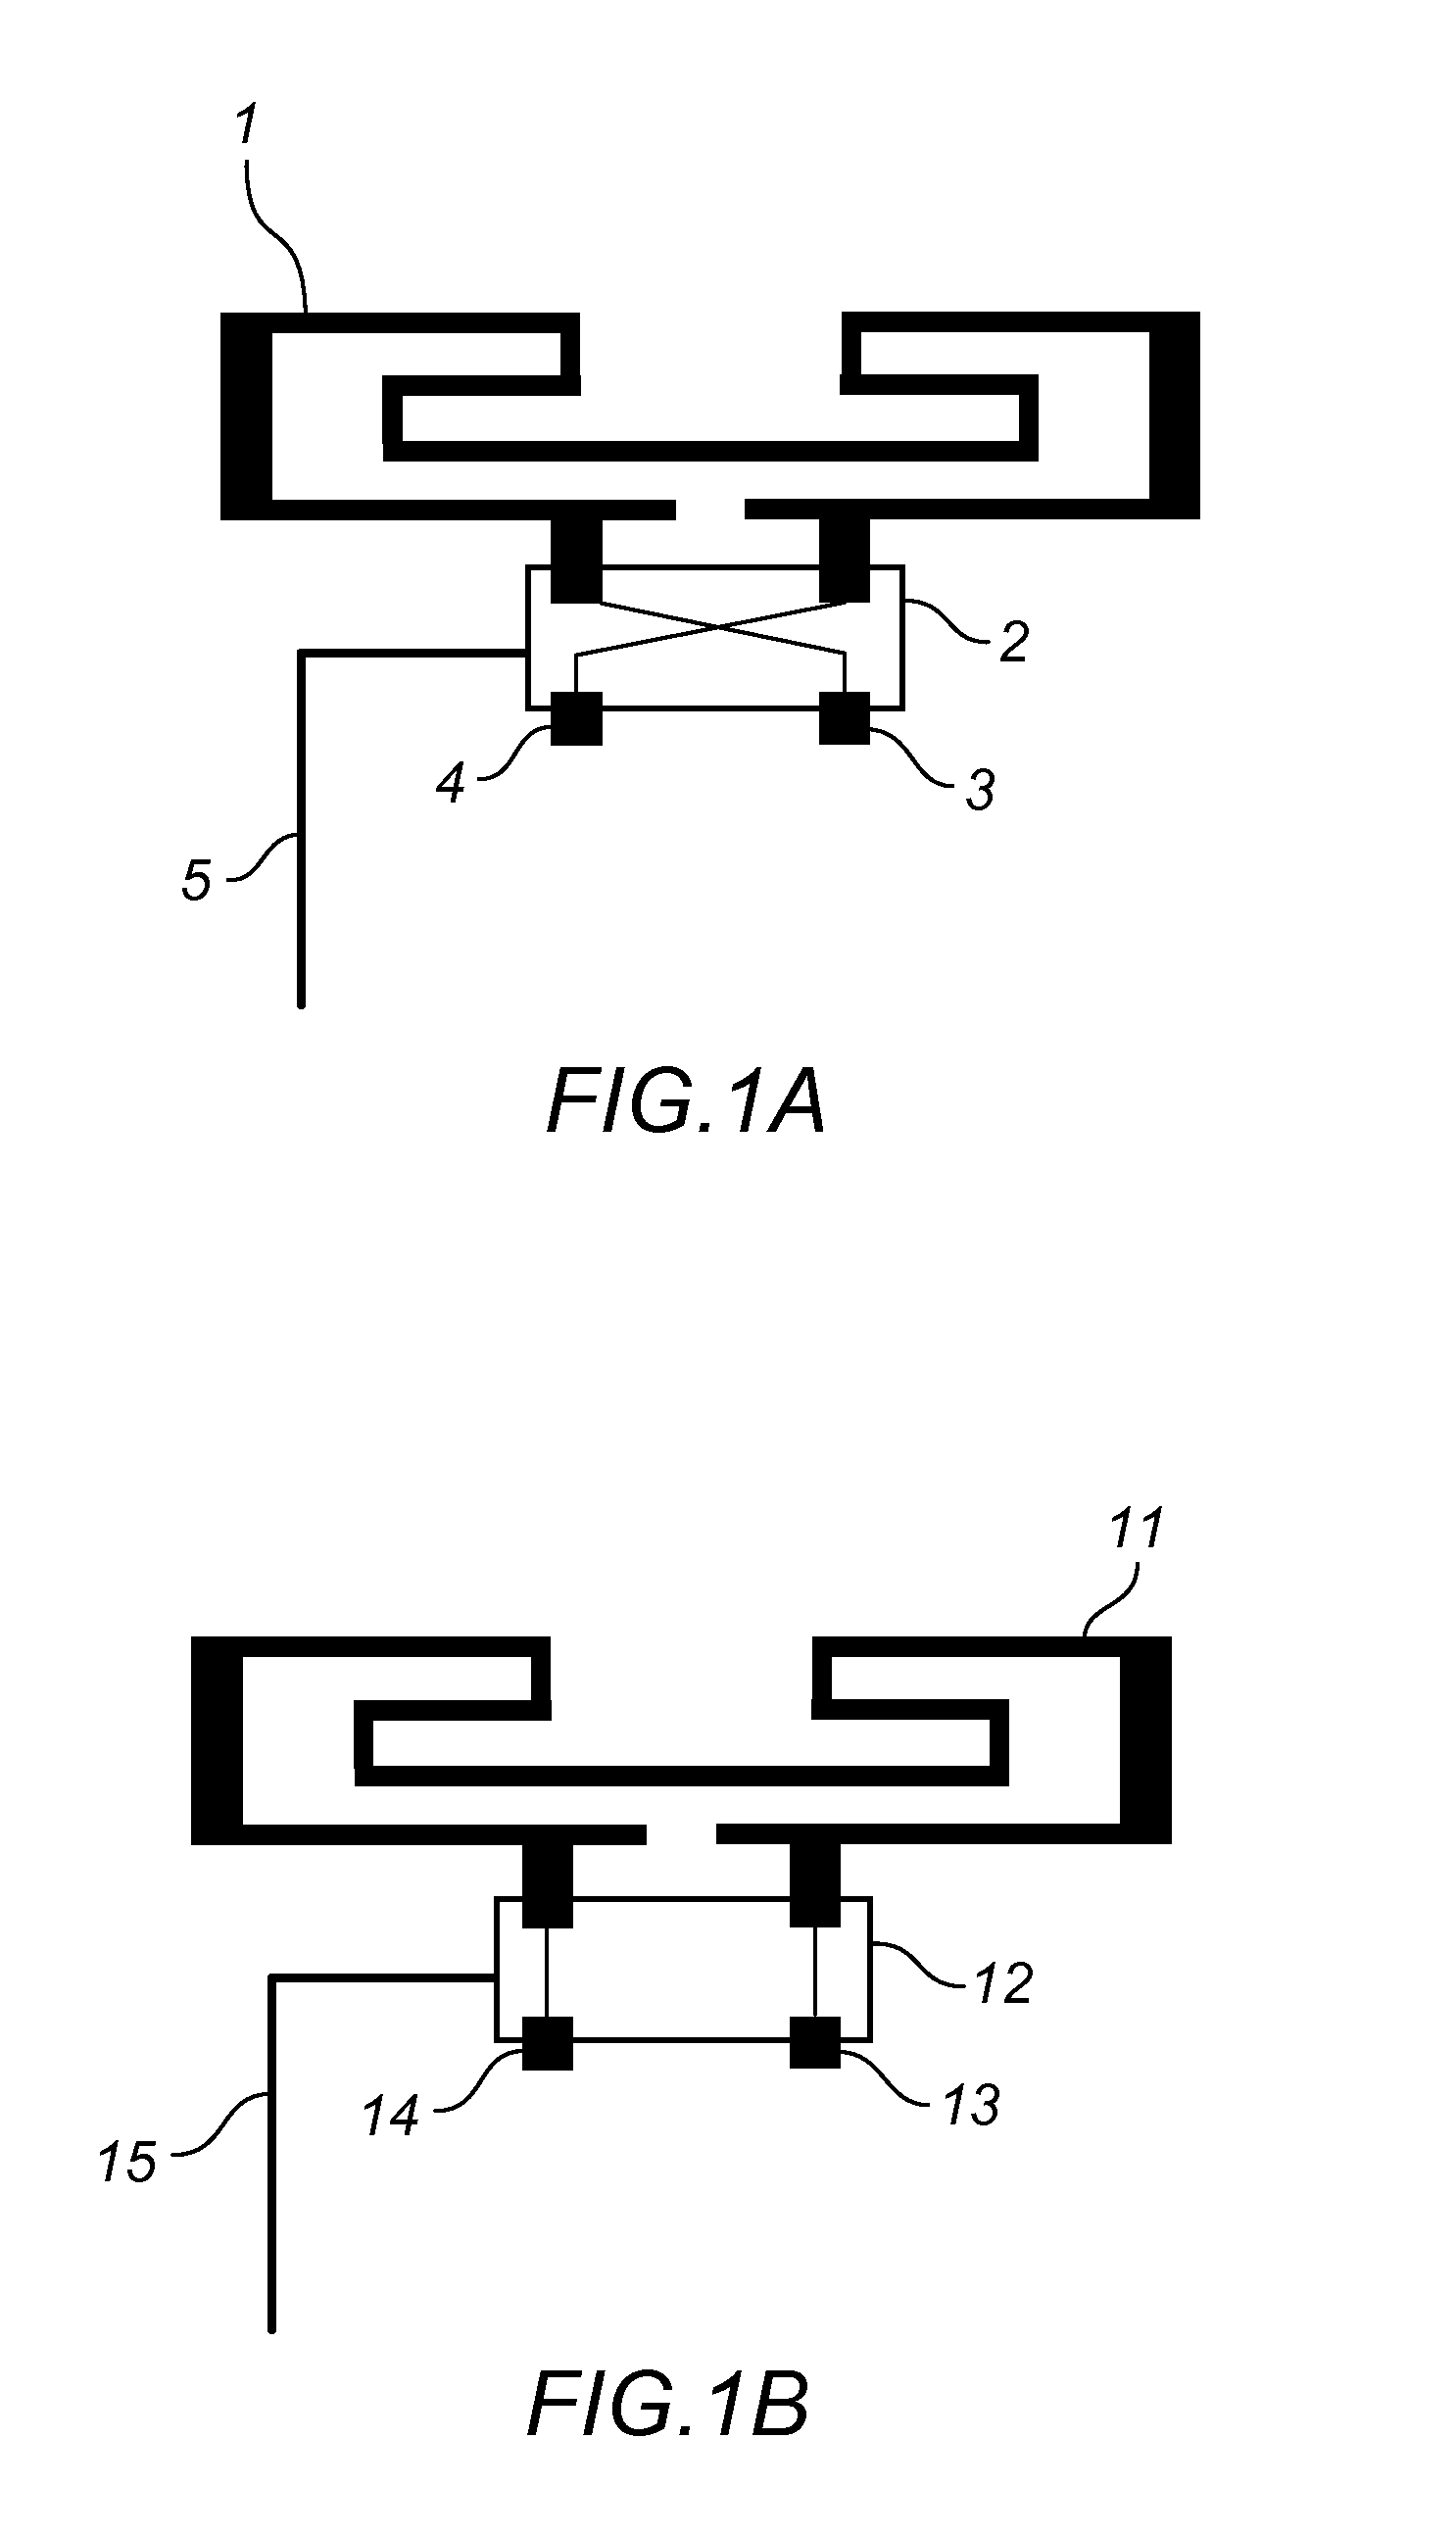 Loop antenna with switchable feeding and grounding points